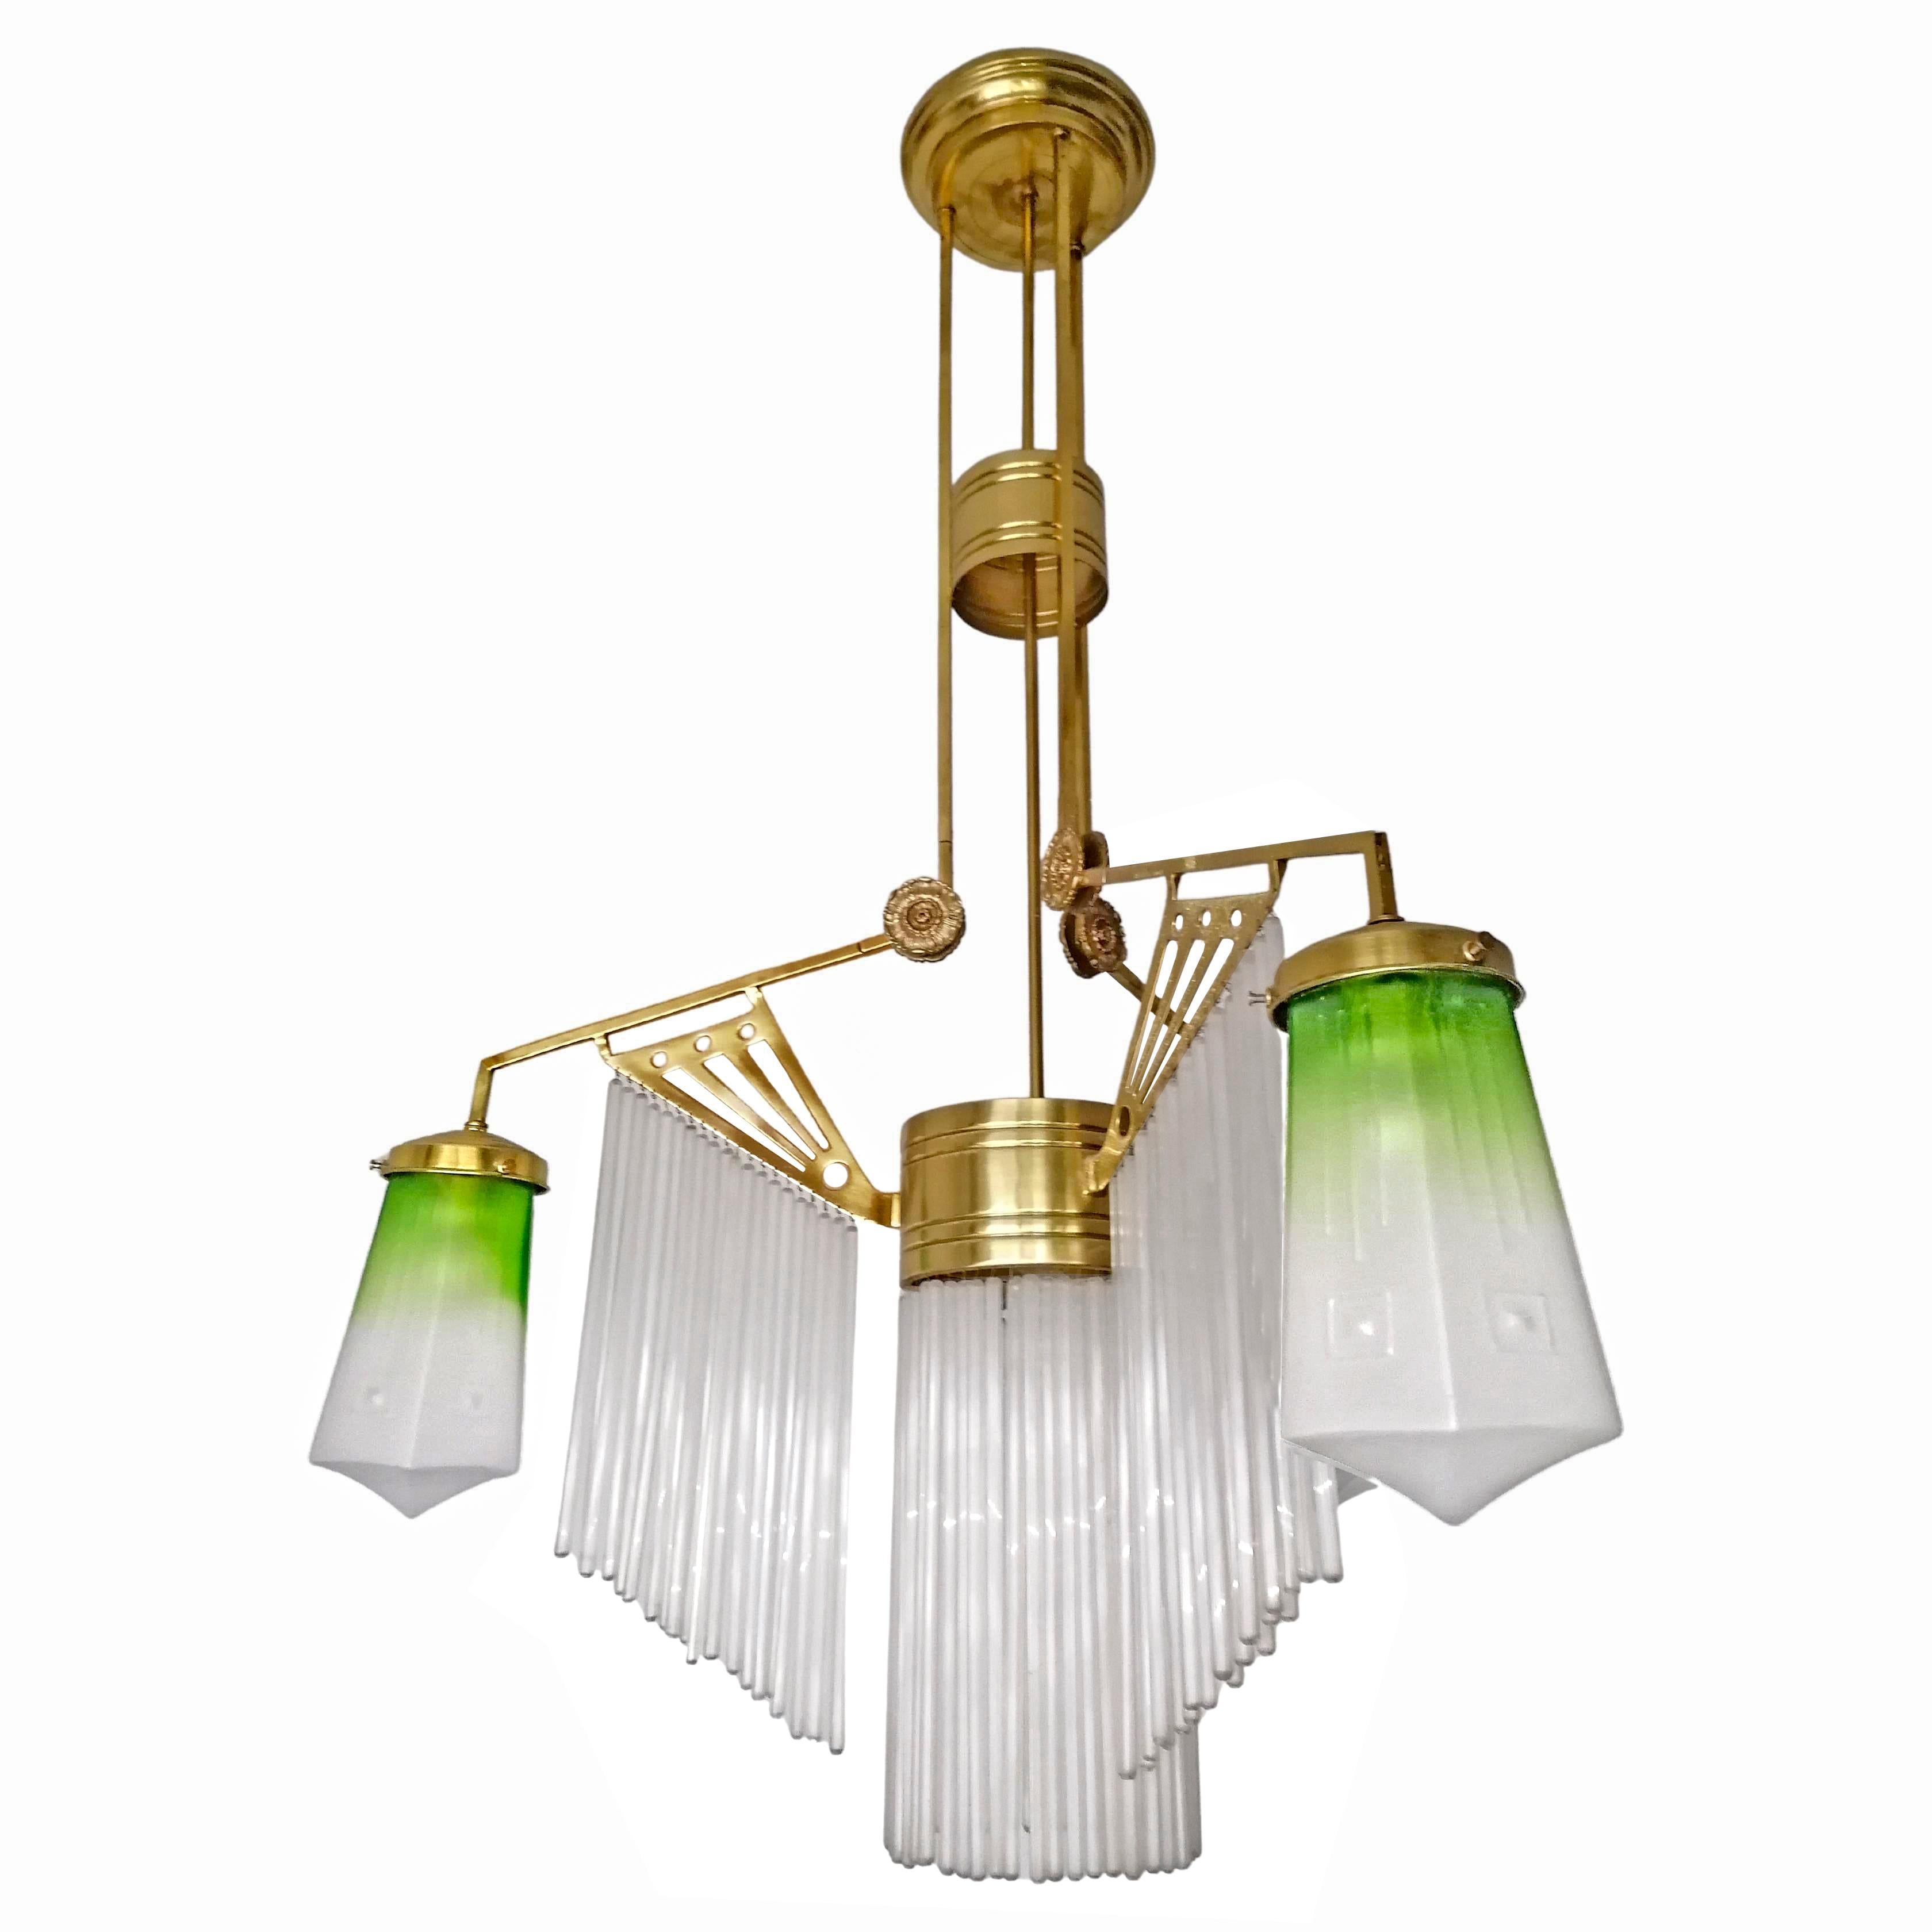 Frosted French Art Deco Skyscraper Chandelier in Green Glass, Straws & Gilt Brass C1920 For Sale